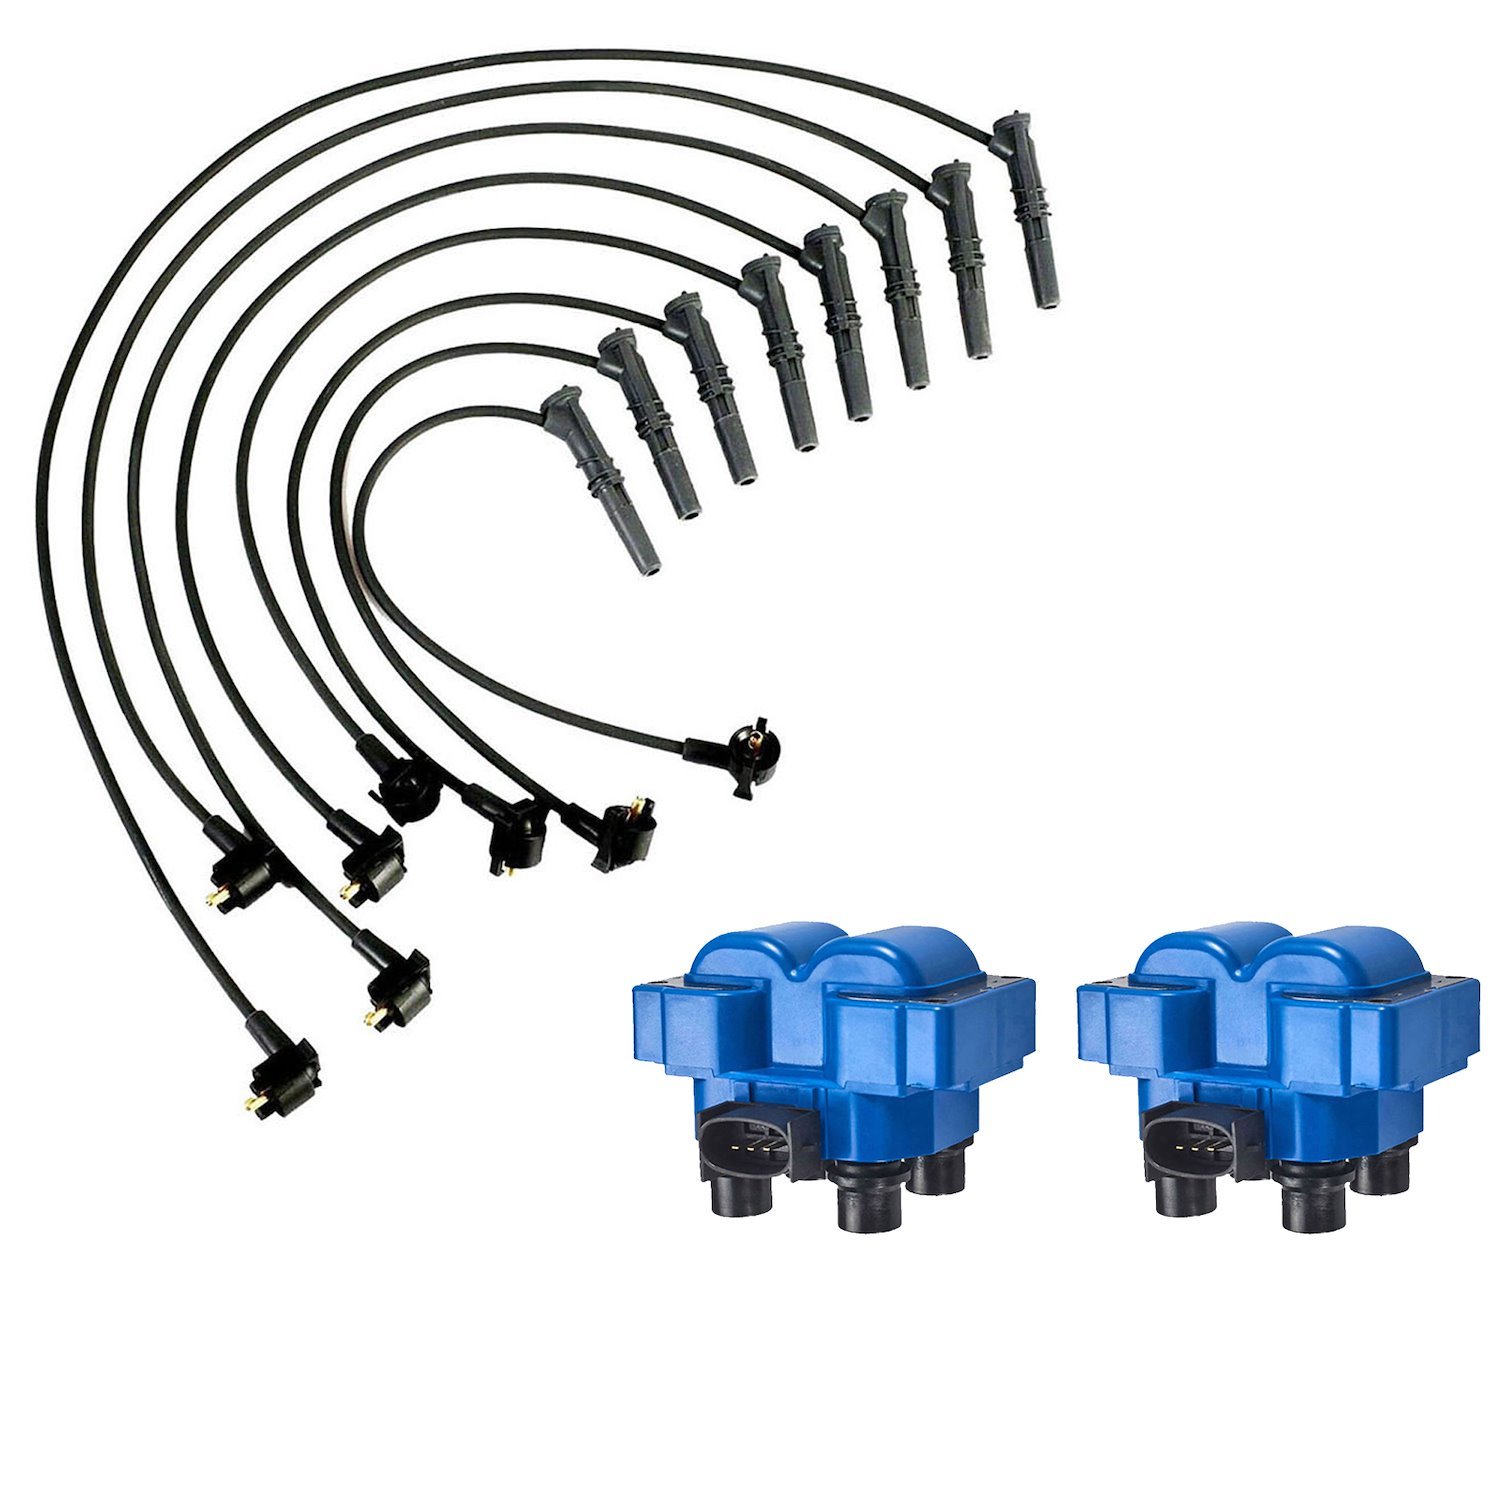 High-Performance Ignition Coil and Spark Plug Wire Kit for Ford F-150/F-250 Lincoln Mercury